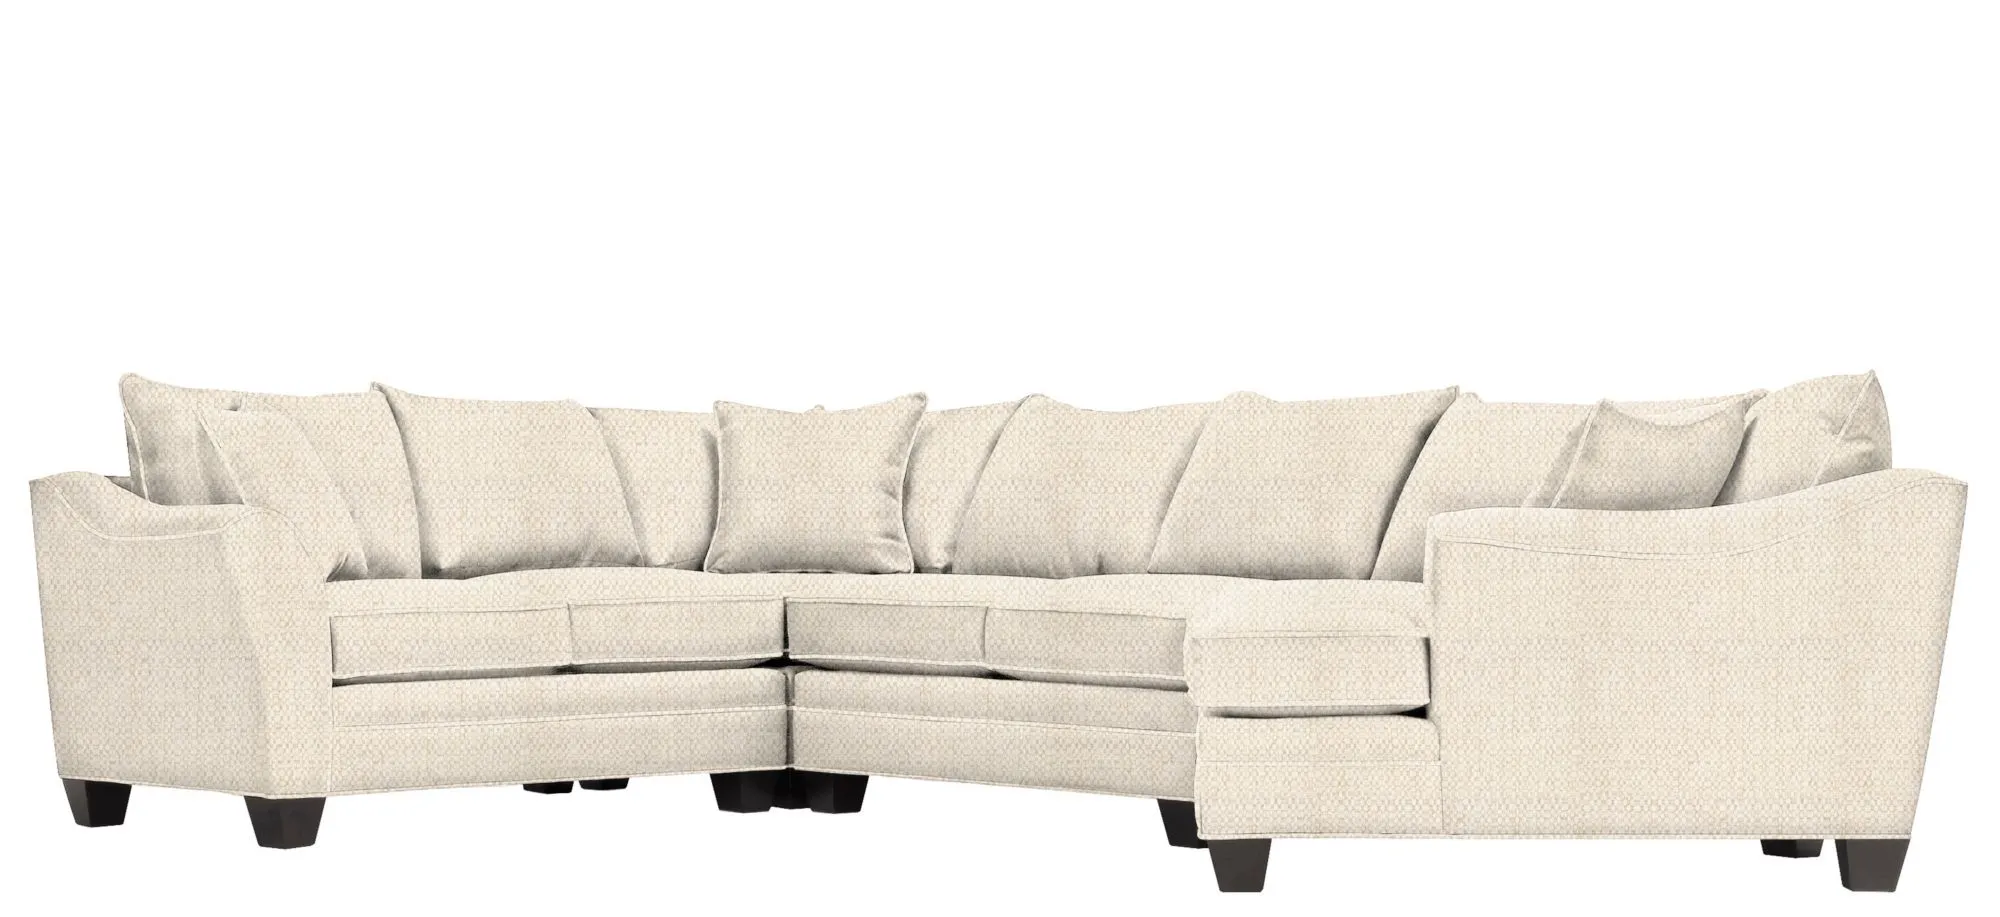 Foresthill 4-pc. Right Hand Cuddler with Loveseat Sectional Sofa in Sugar Shack Alabaster by H.M. Richards